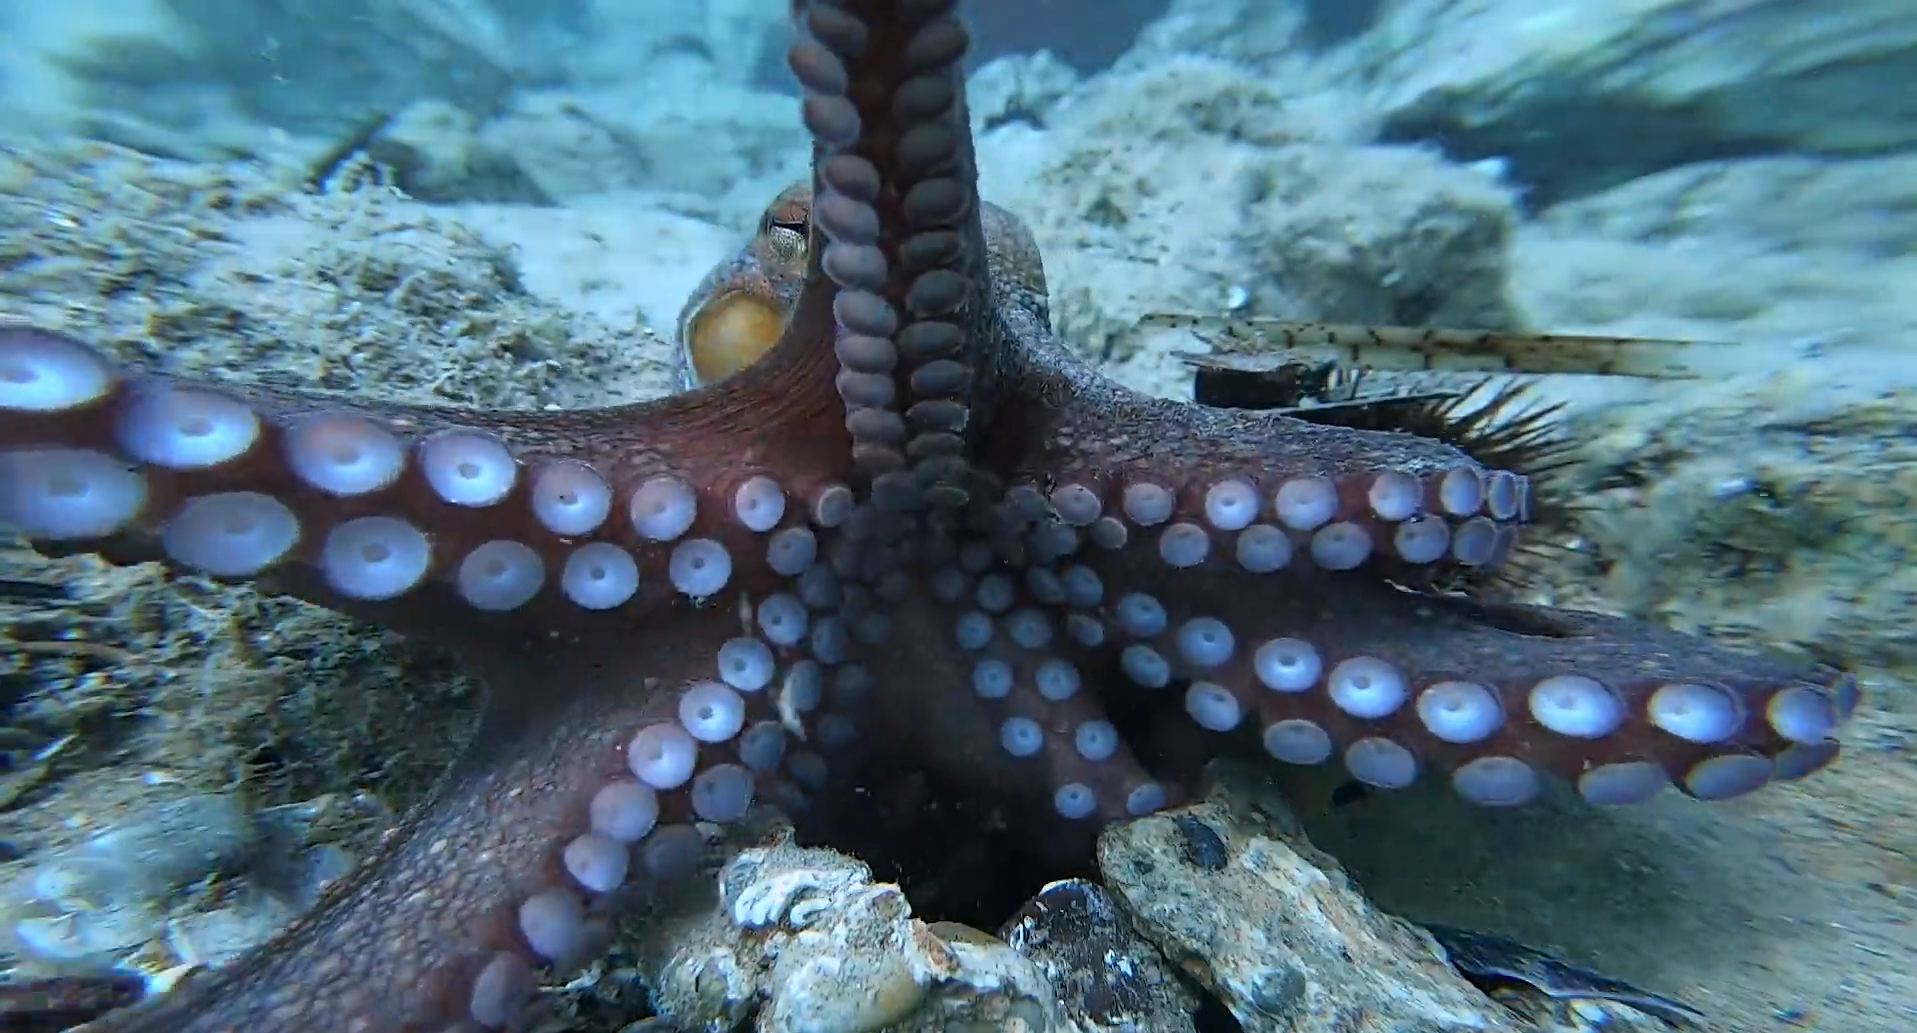 A Common Octopus reaches out for a GoPro